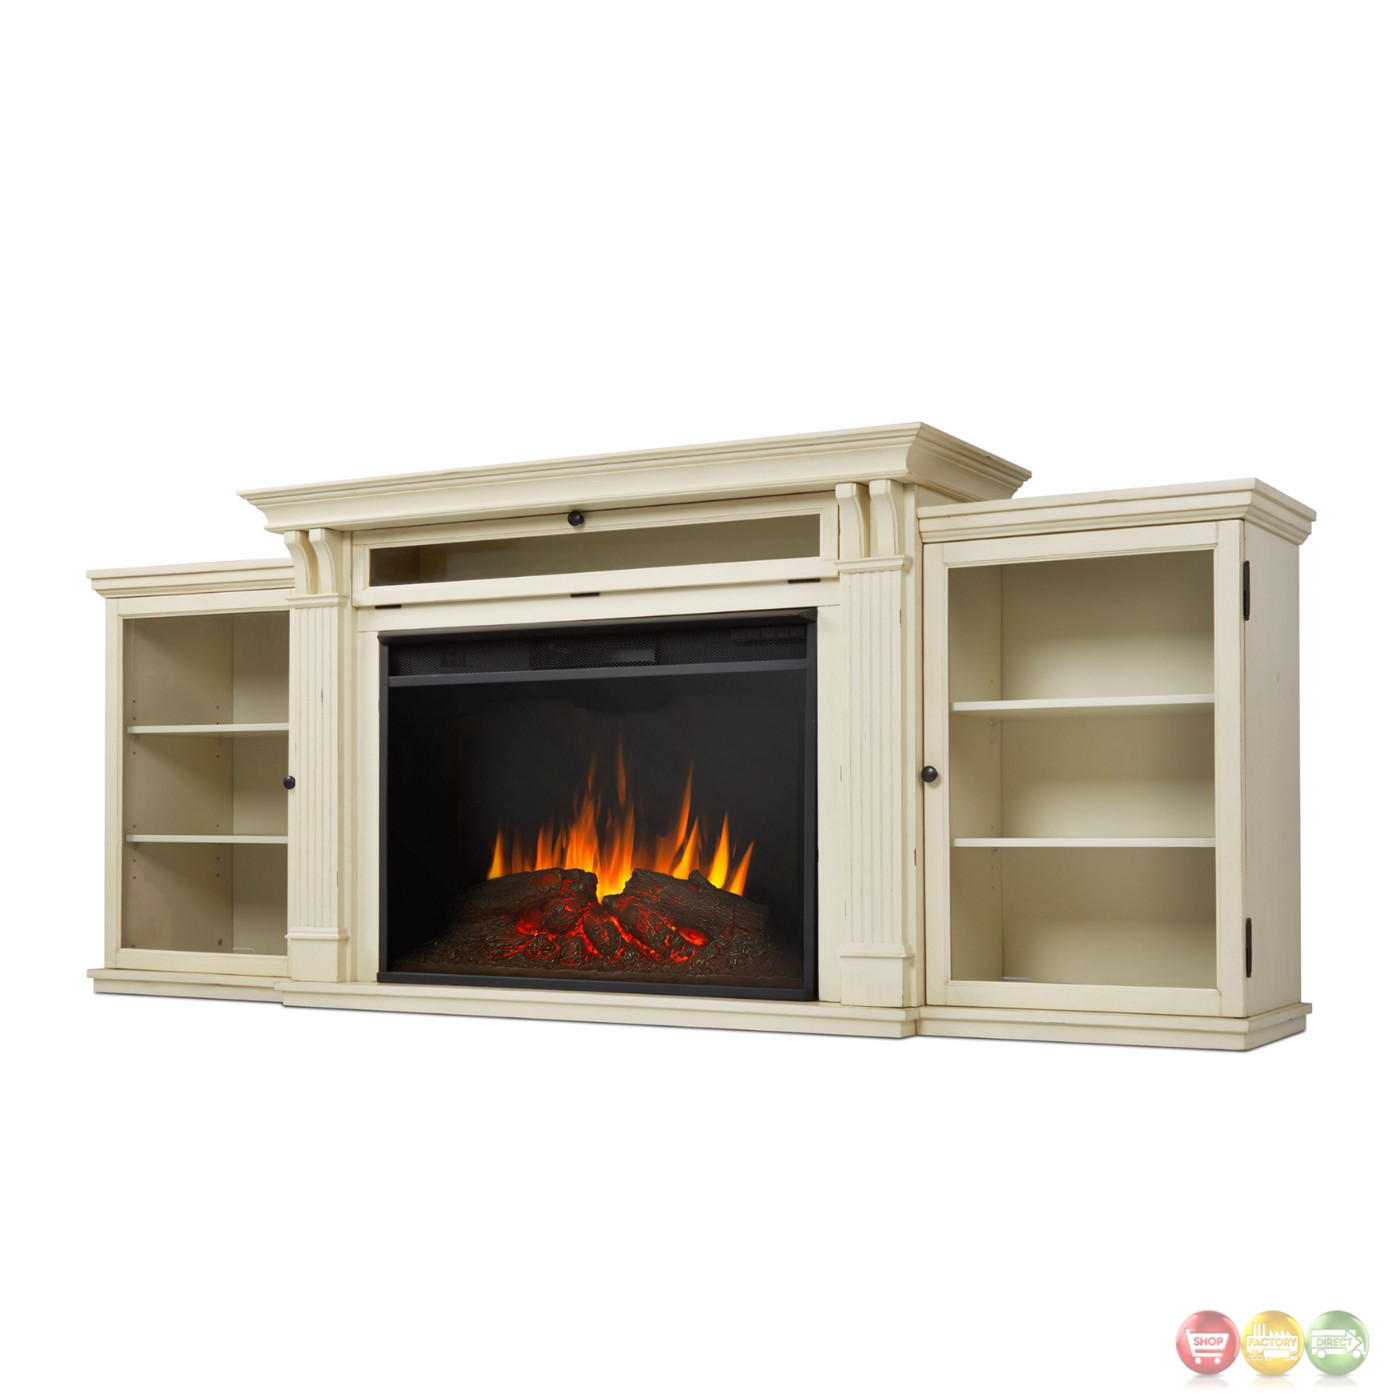 Distressed Electric Fireplace
 Tracey Grand Entertainment Center Electric Fireplace In